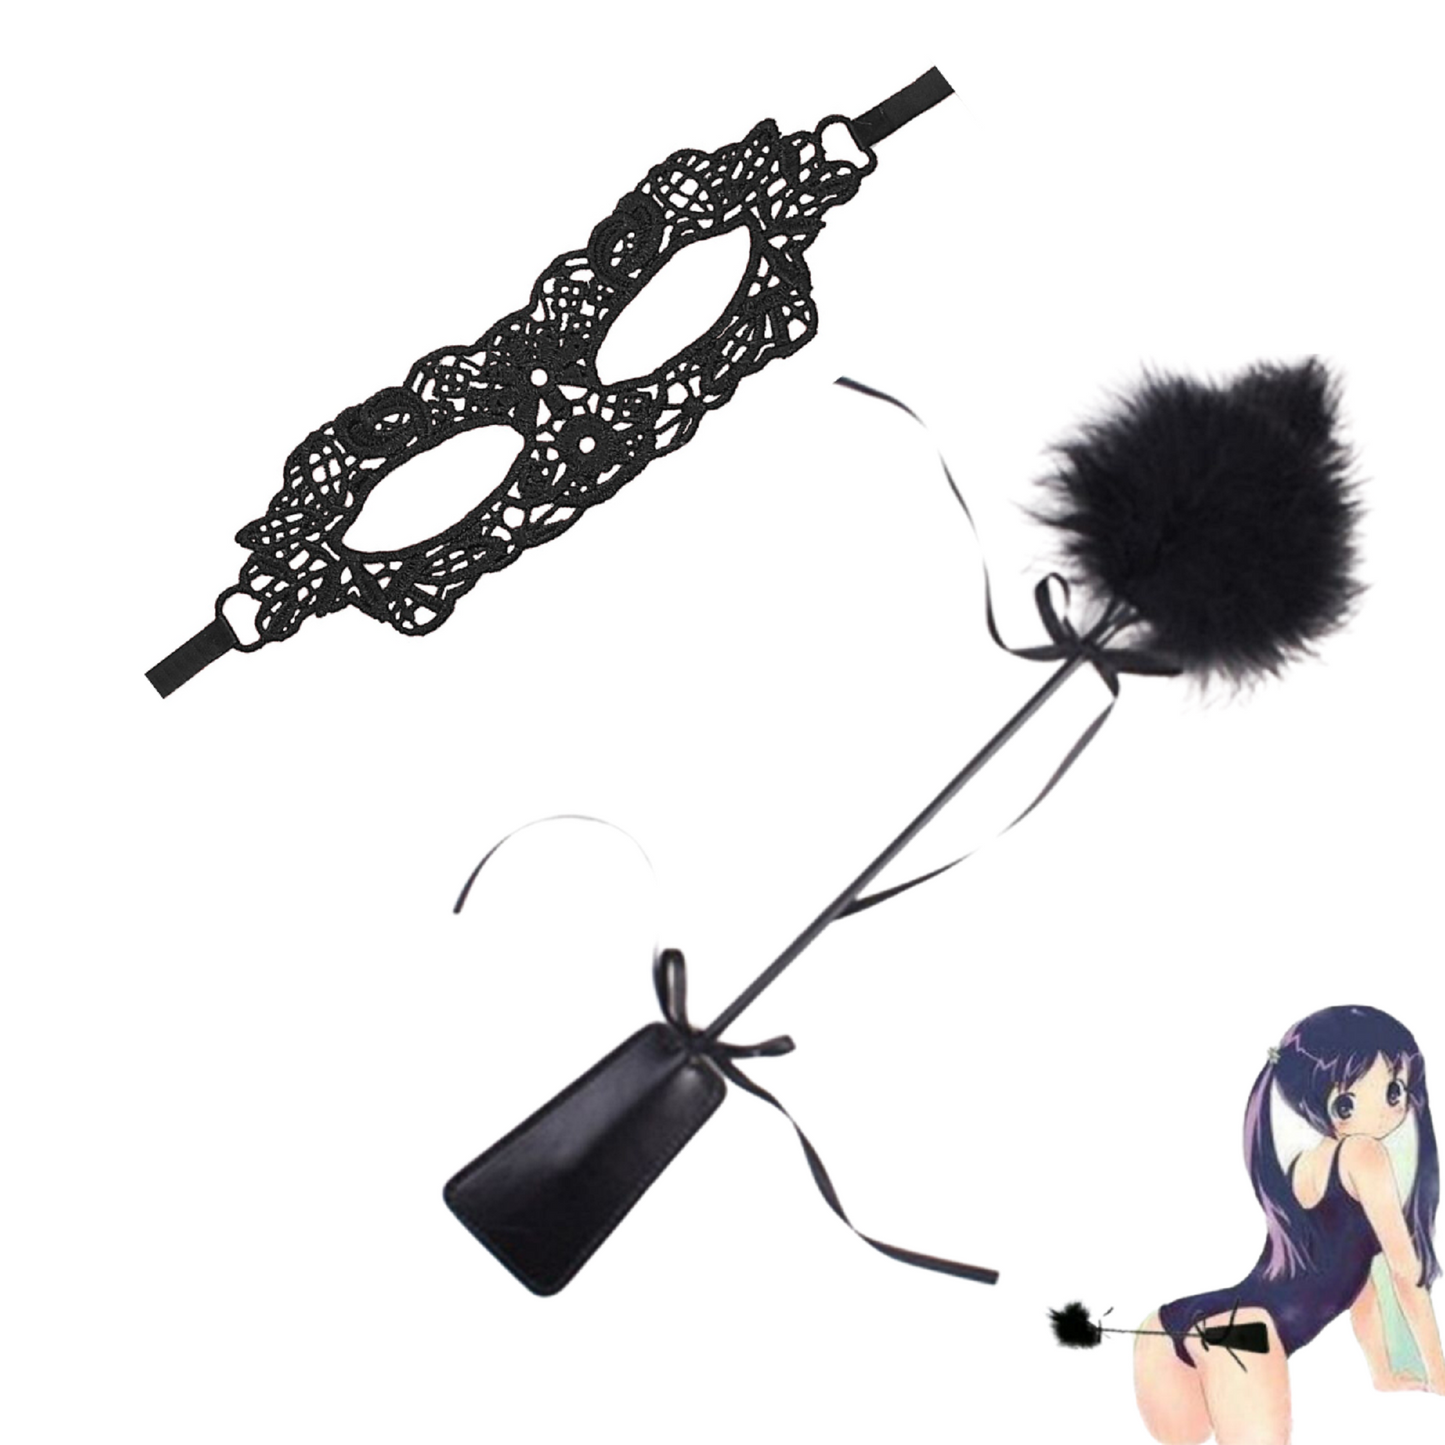 2-in-1 Spanking Paddle and Tickler and Masquerade Lace Mask Set